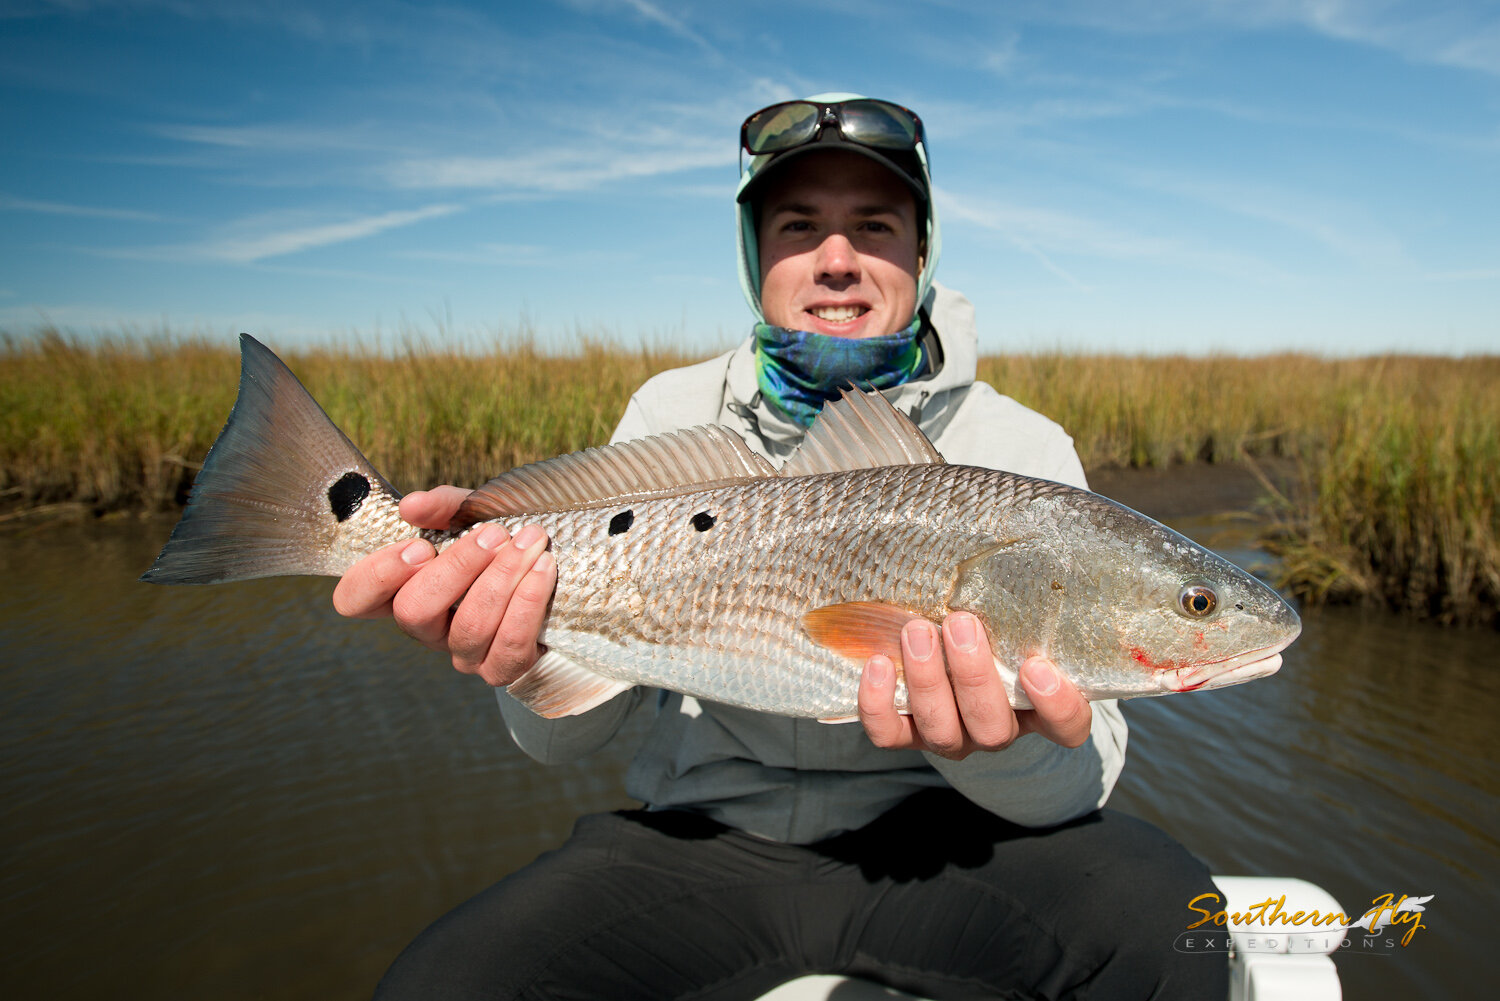 2019-11-01-02_SouthernFlyExpeditions_NewOrleans_BradSparling-3.jpg